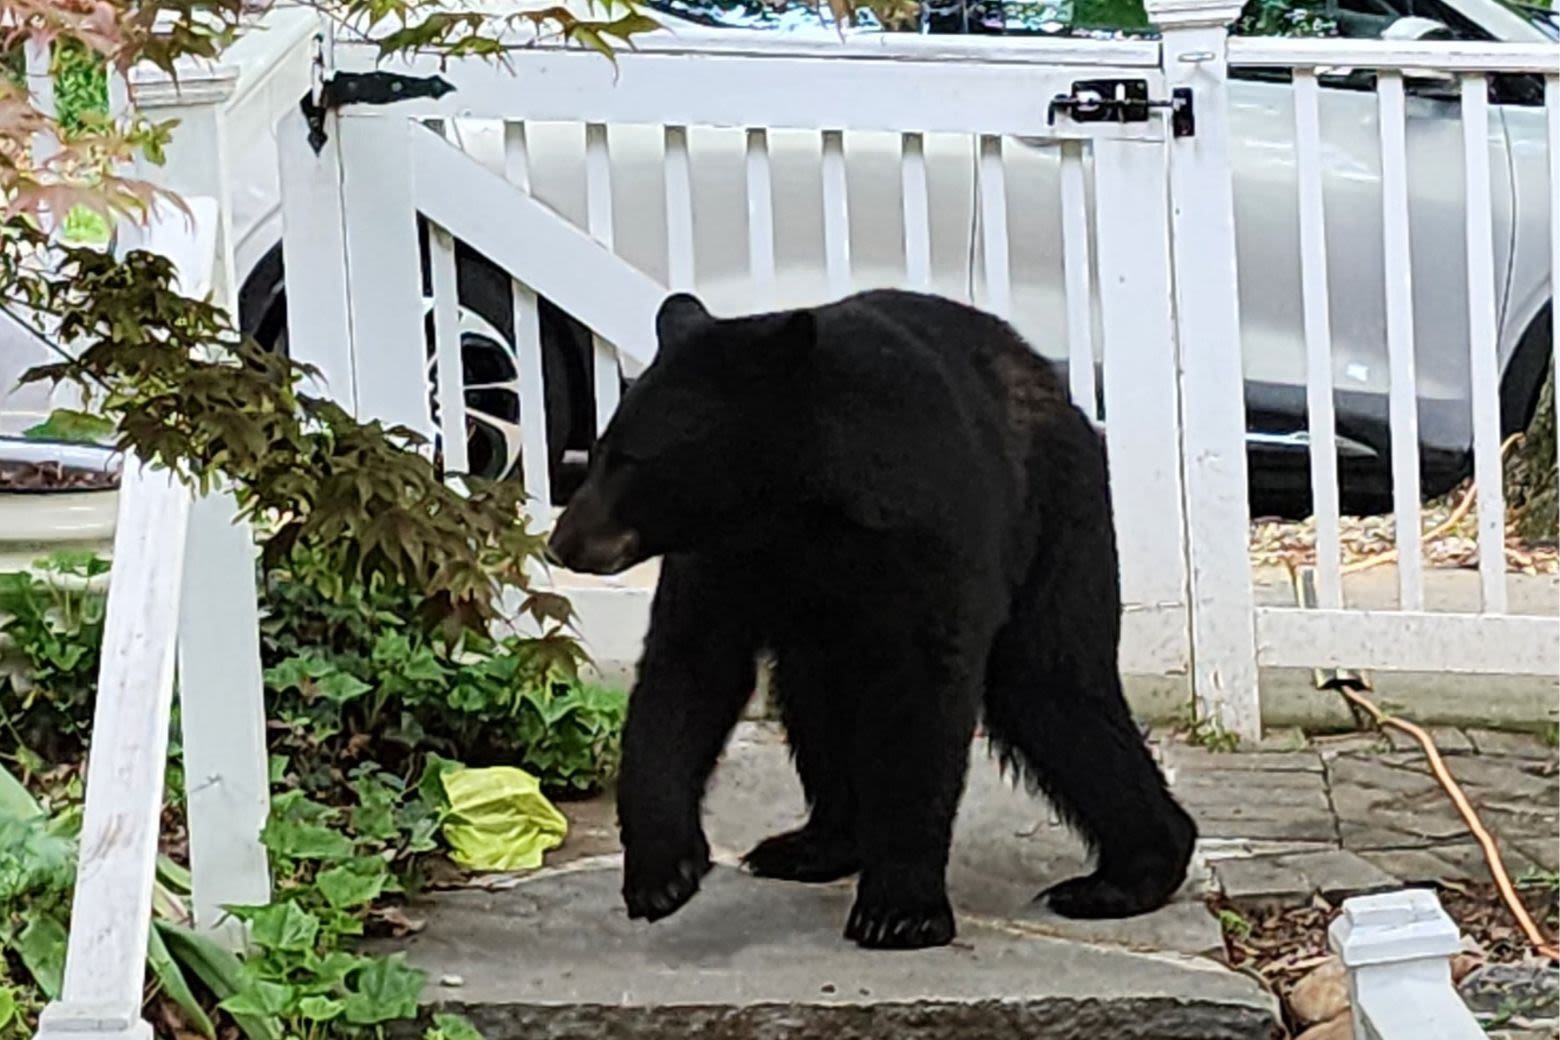 ‘All are welcome, even bears’: DC’s Brookland neighborhood sounds off on its latest furry intruder - WTOP News